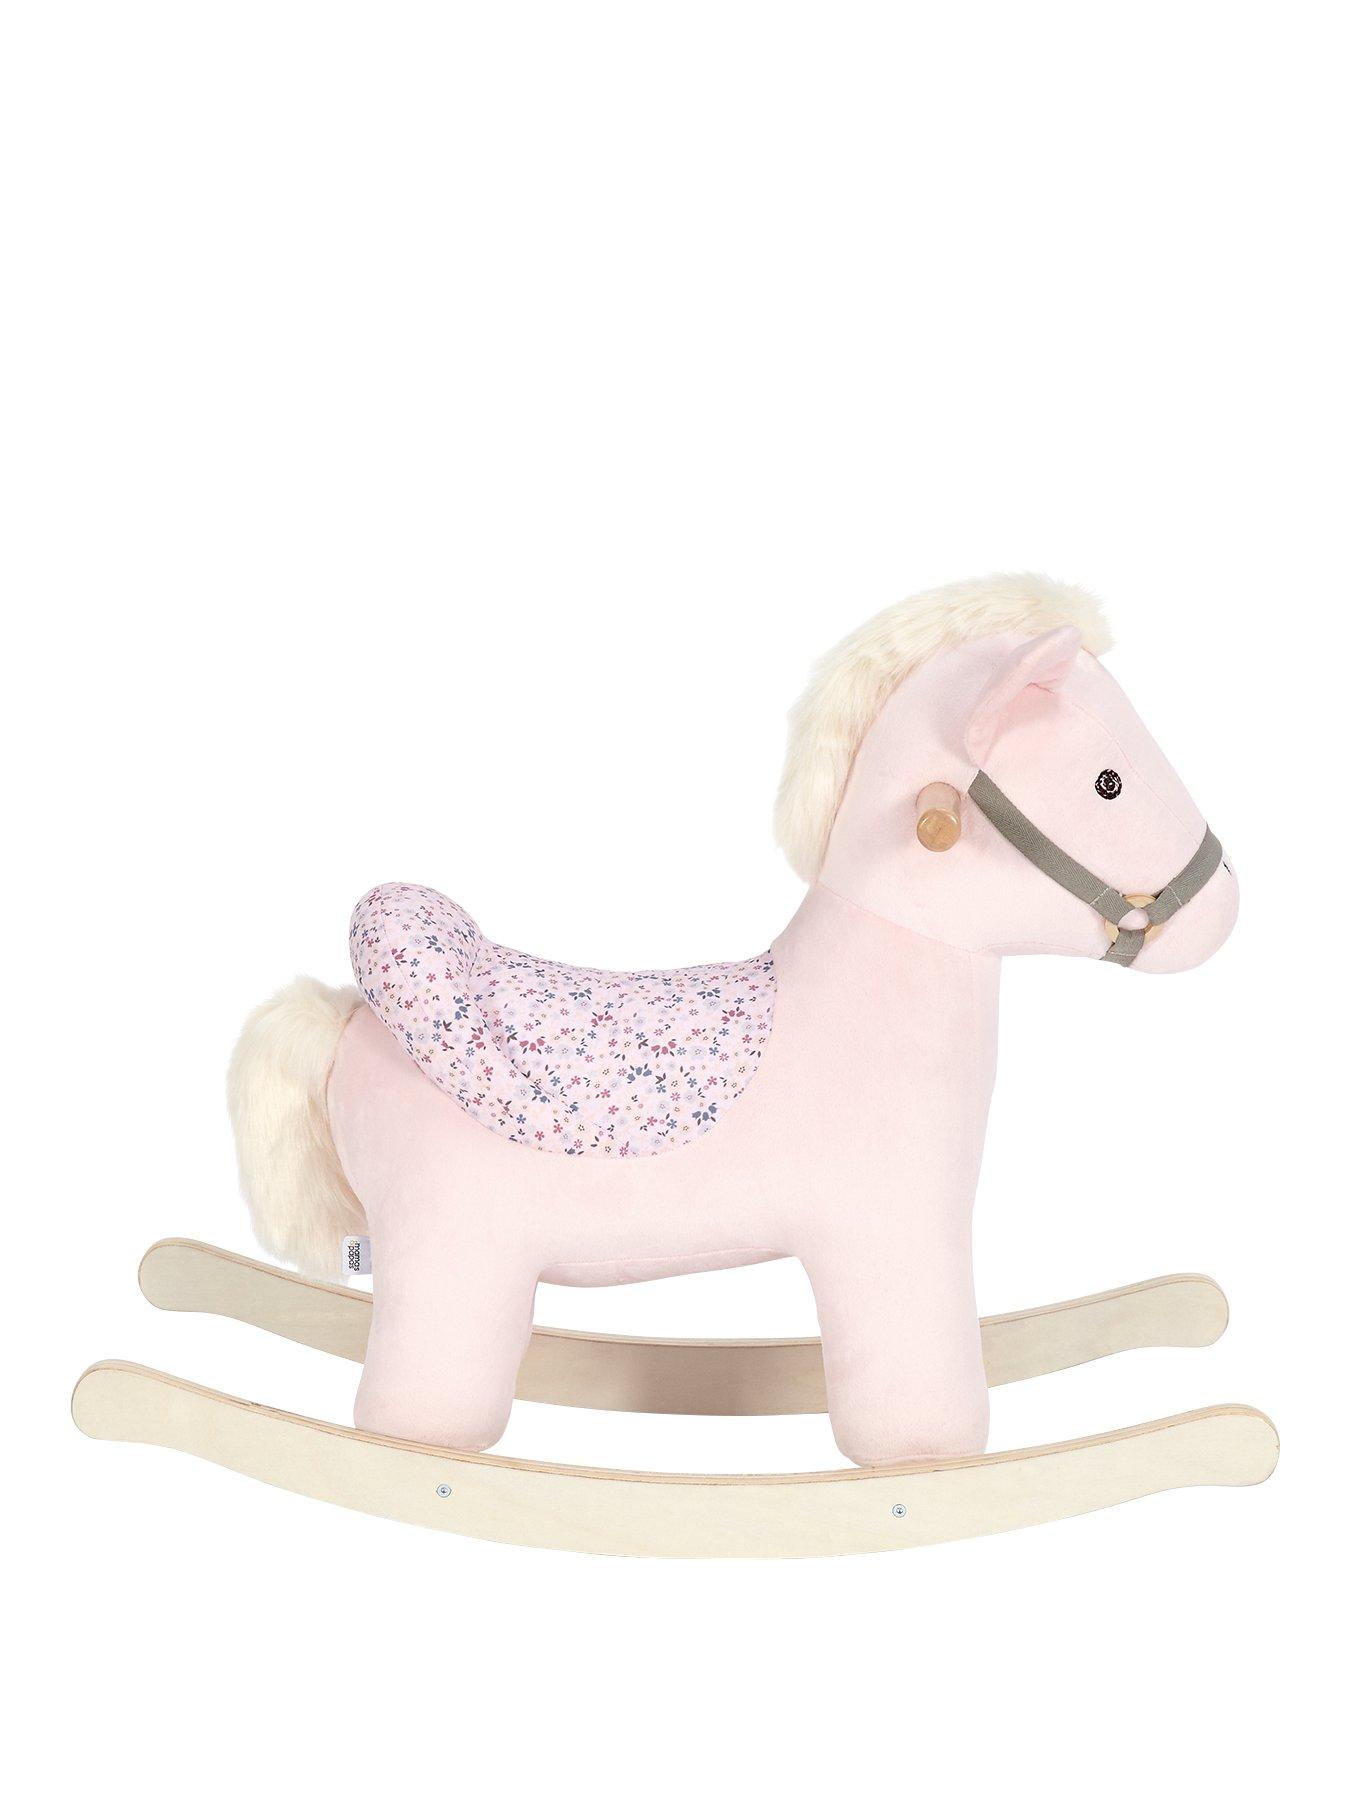 DOLU Rocking Horse with Wheels Plastic Rock Your Horse or Ride  Easy Assembly